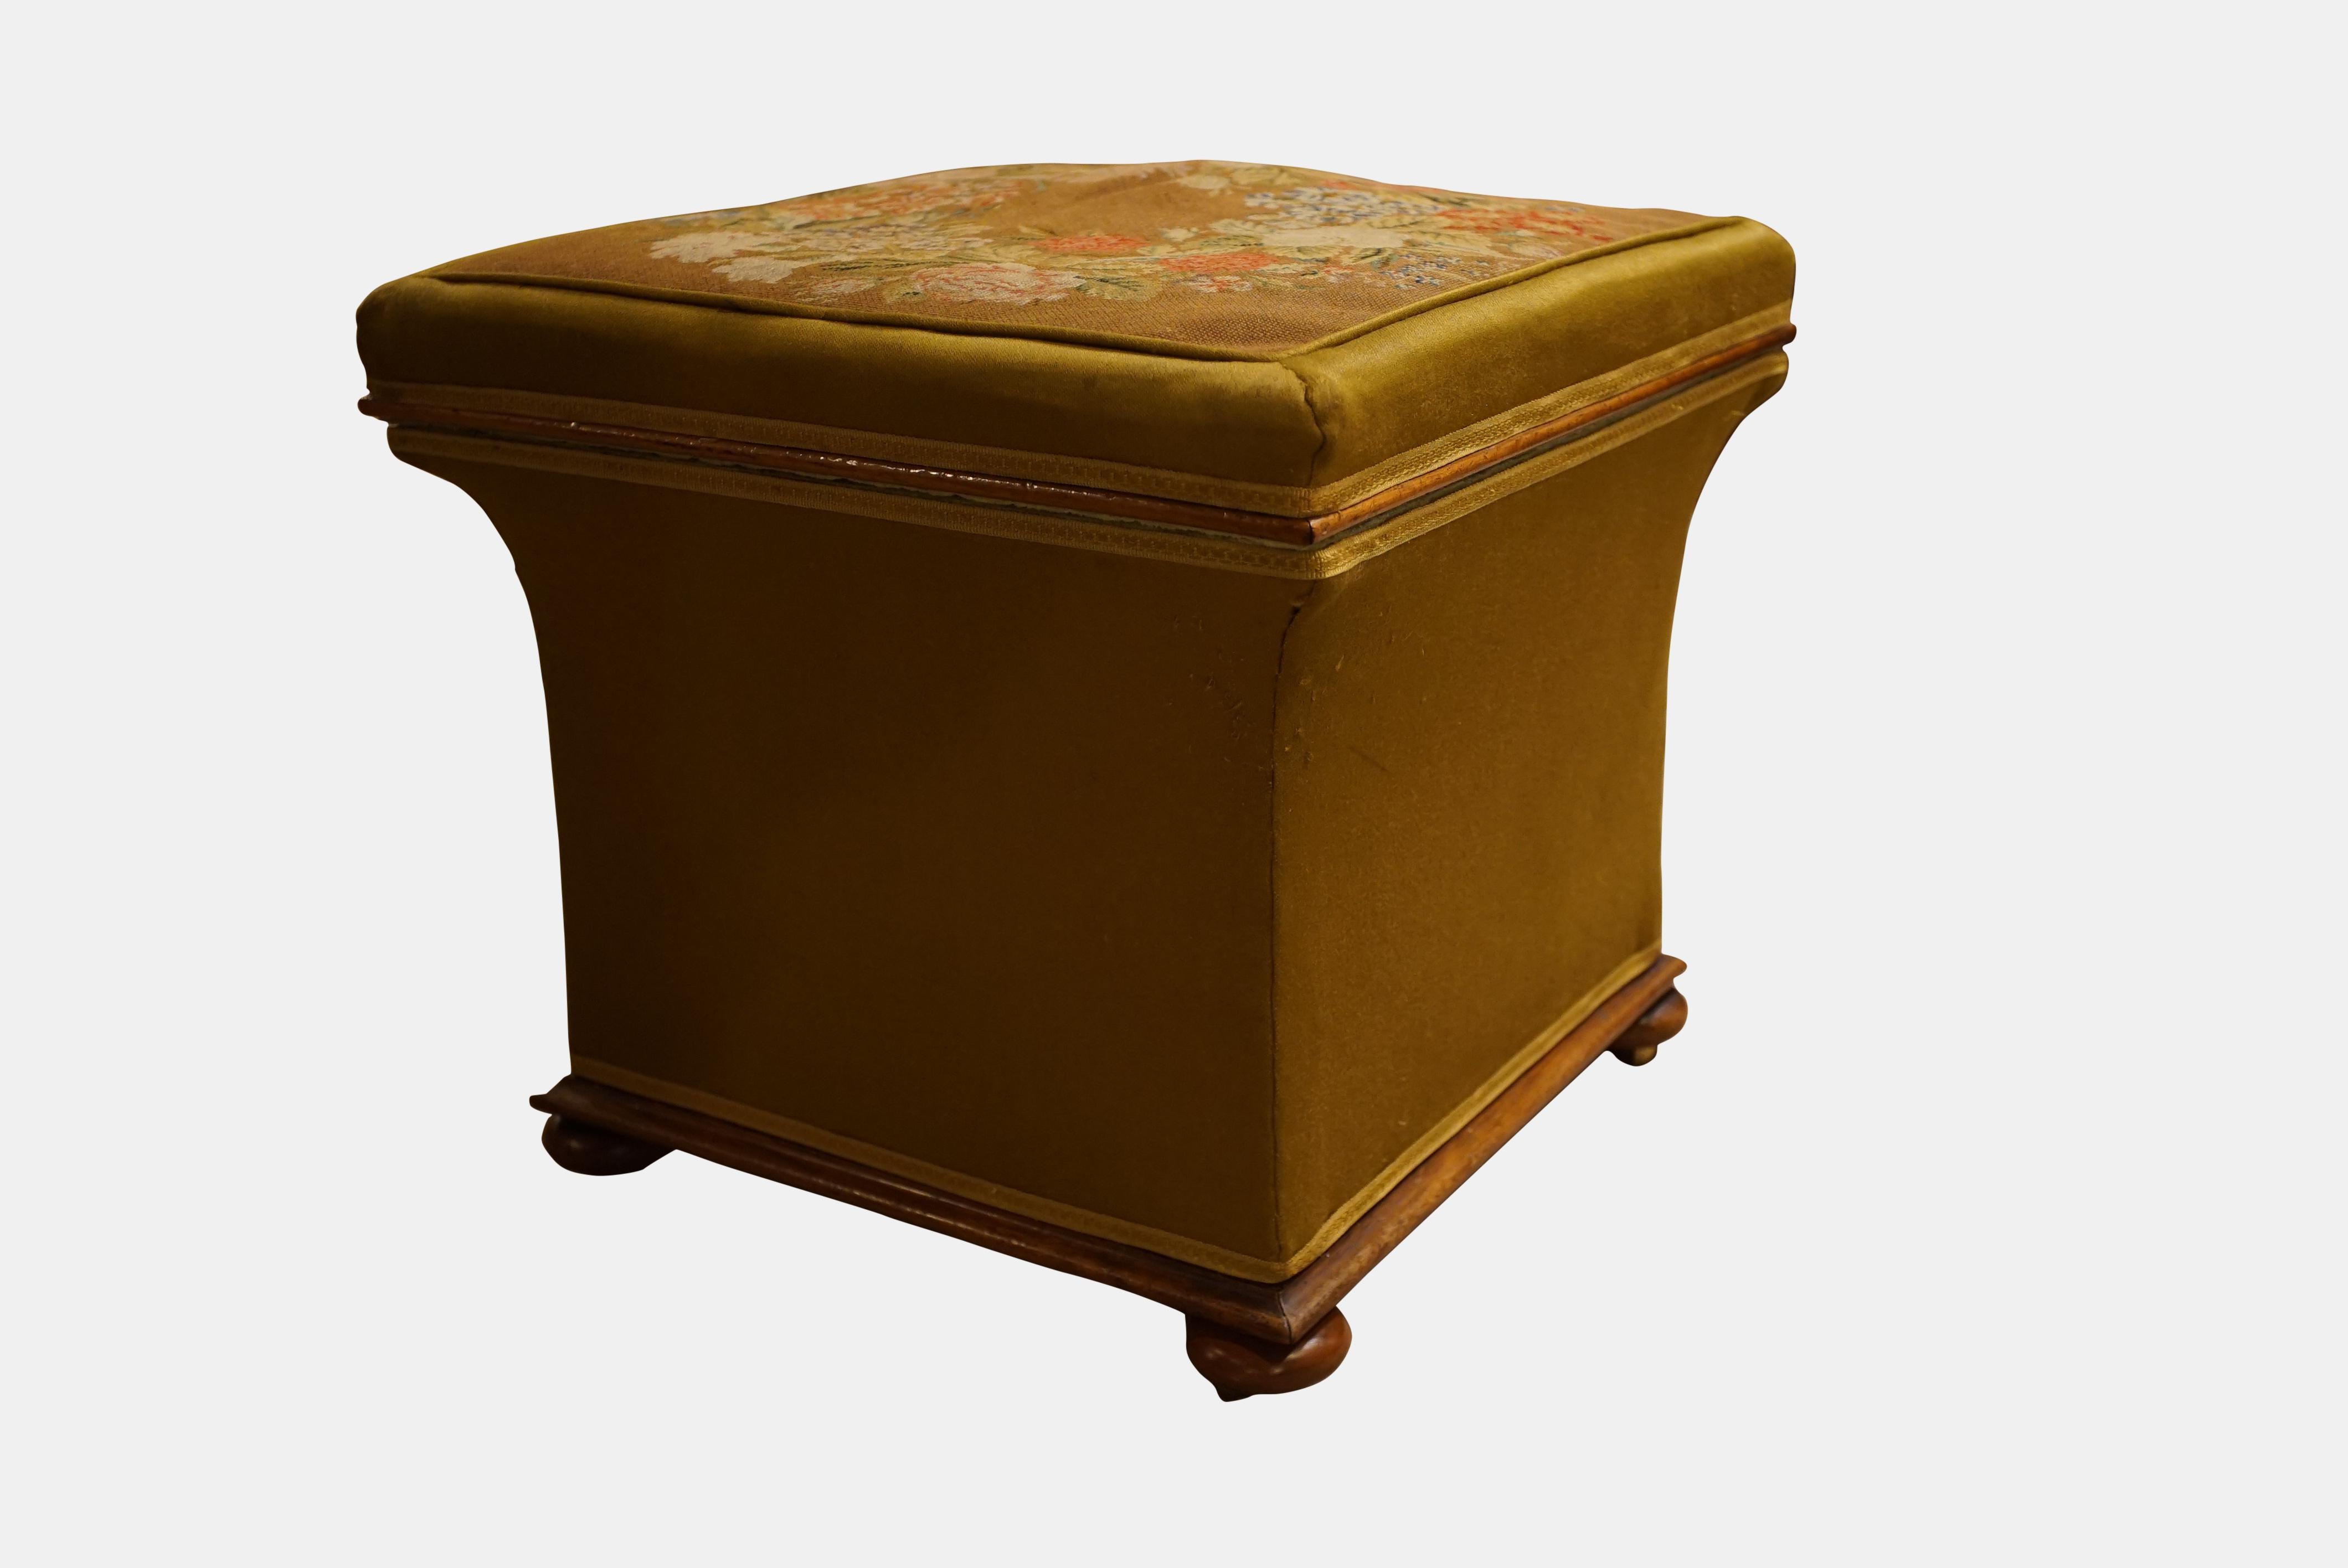 A Victorian Square Concave Sided Stool with a hinged top in Berlin needlework